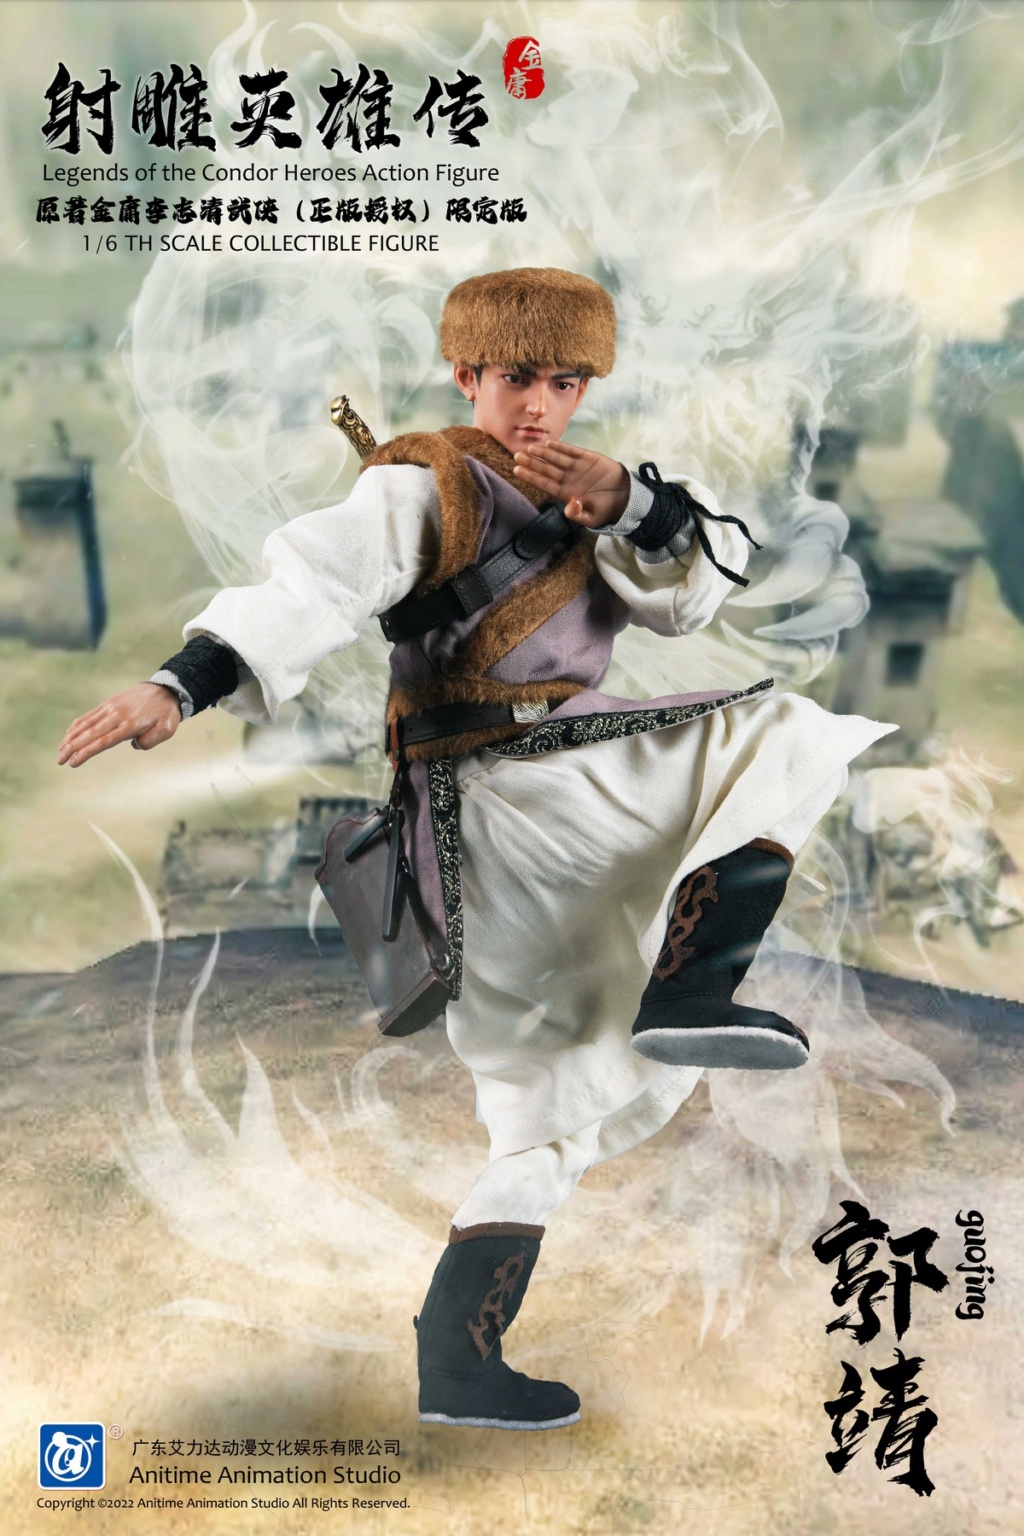 NEW PRODUCT: Ailida Animation: 1/6 Jin Yong Li Zhiqing (authenticated) Legend of the Condor Heroes Guo Jing 19212910